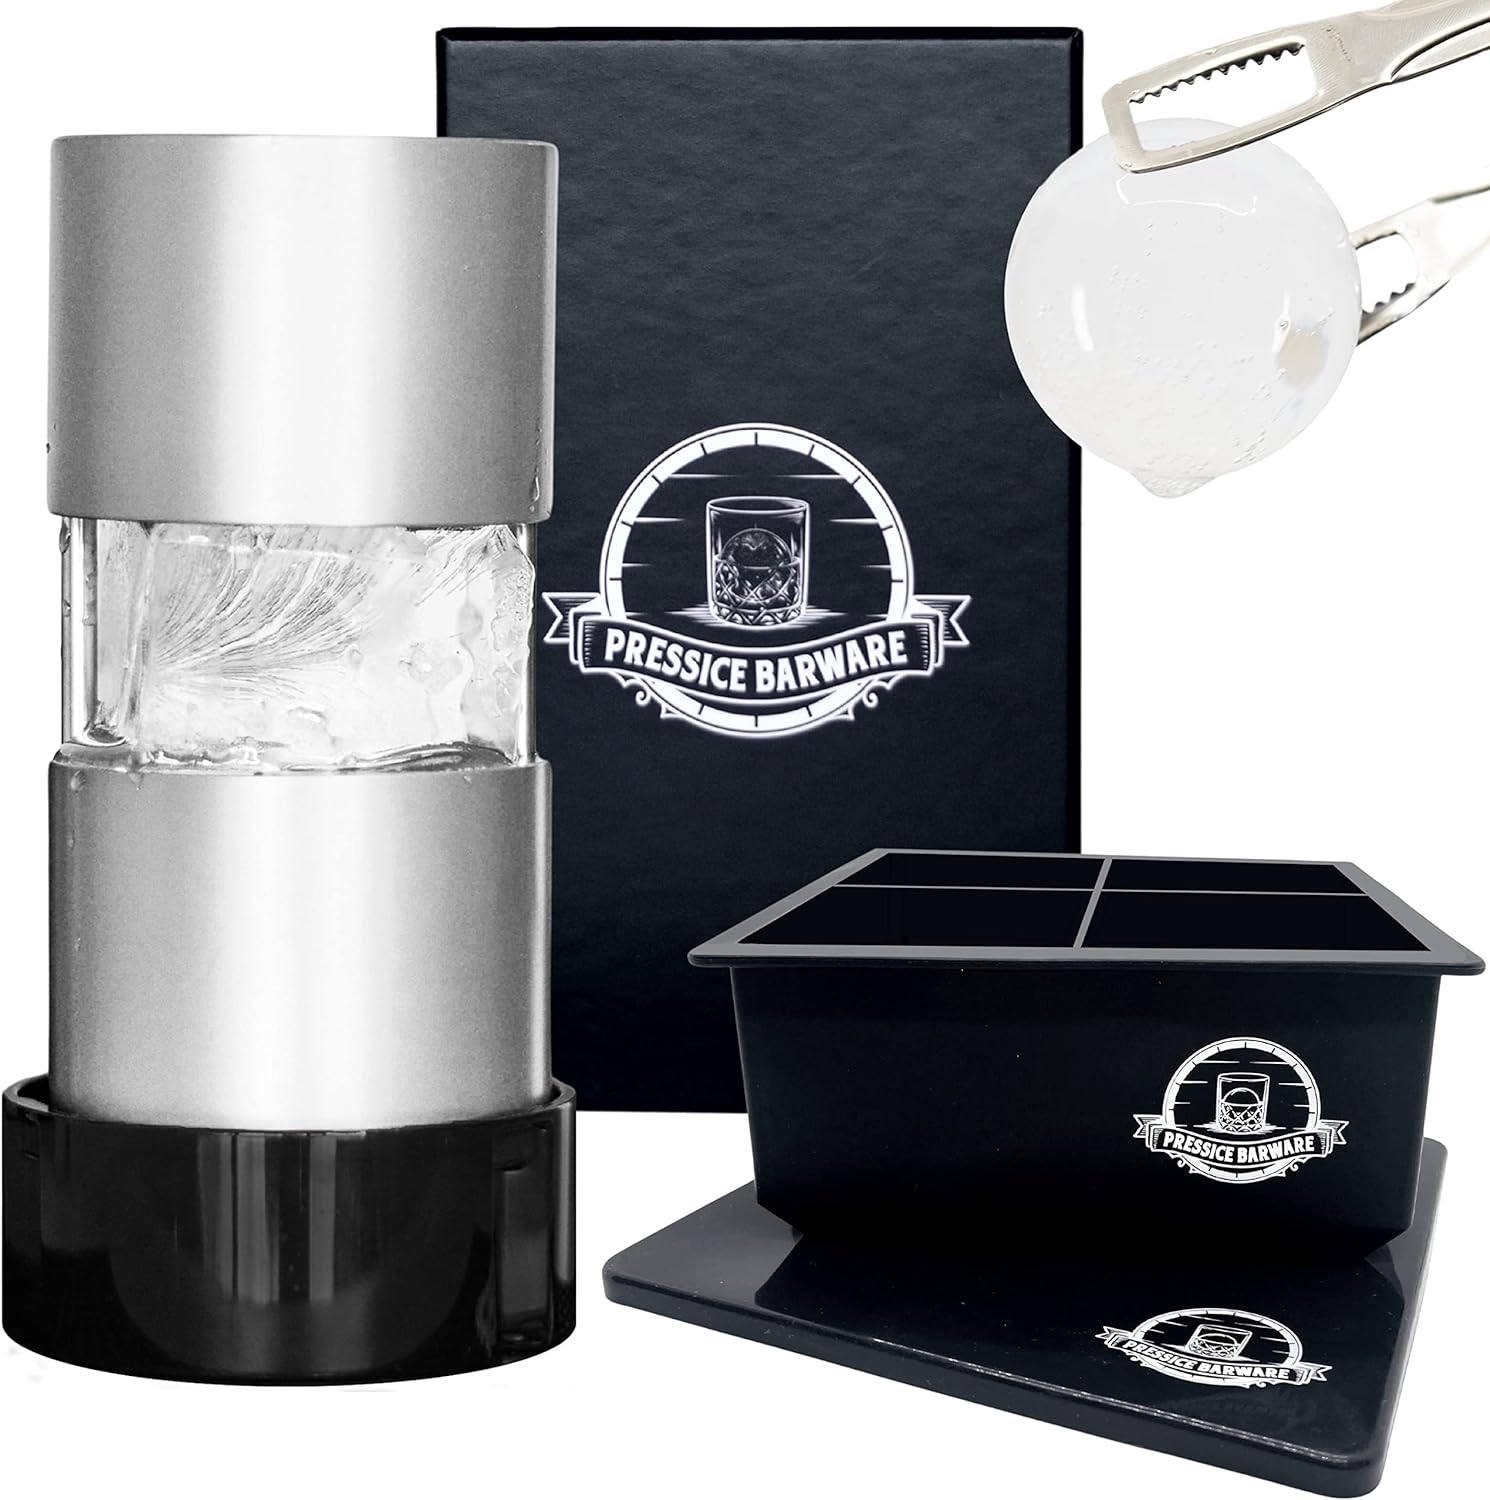 Ice Ball Press - Effortlessly Make Giant 2.3" Ice Balls - Includes Aircraft Grade Aluminum Ice Press and Ice Mold - Assembled in the US (Ice Press, Silver)